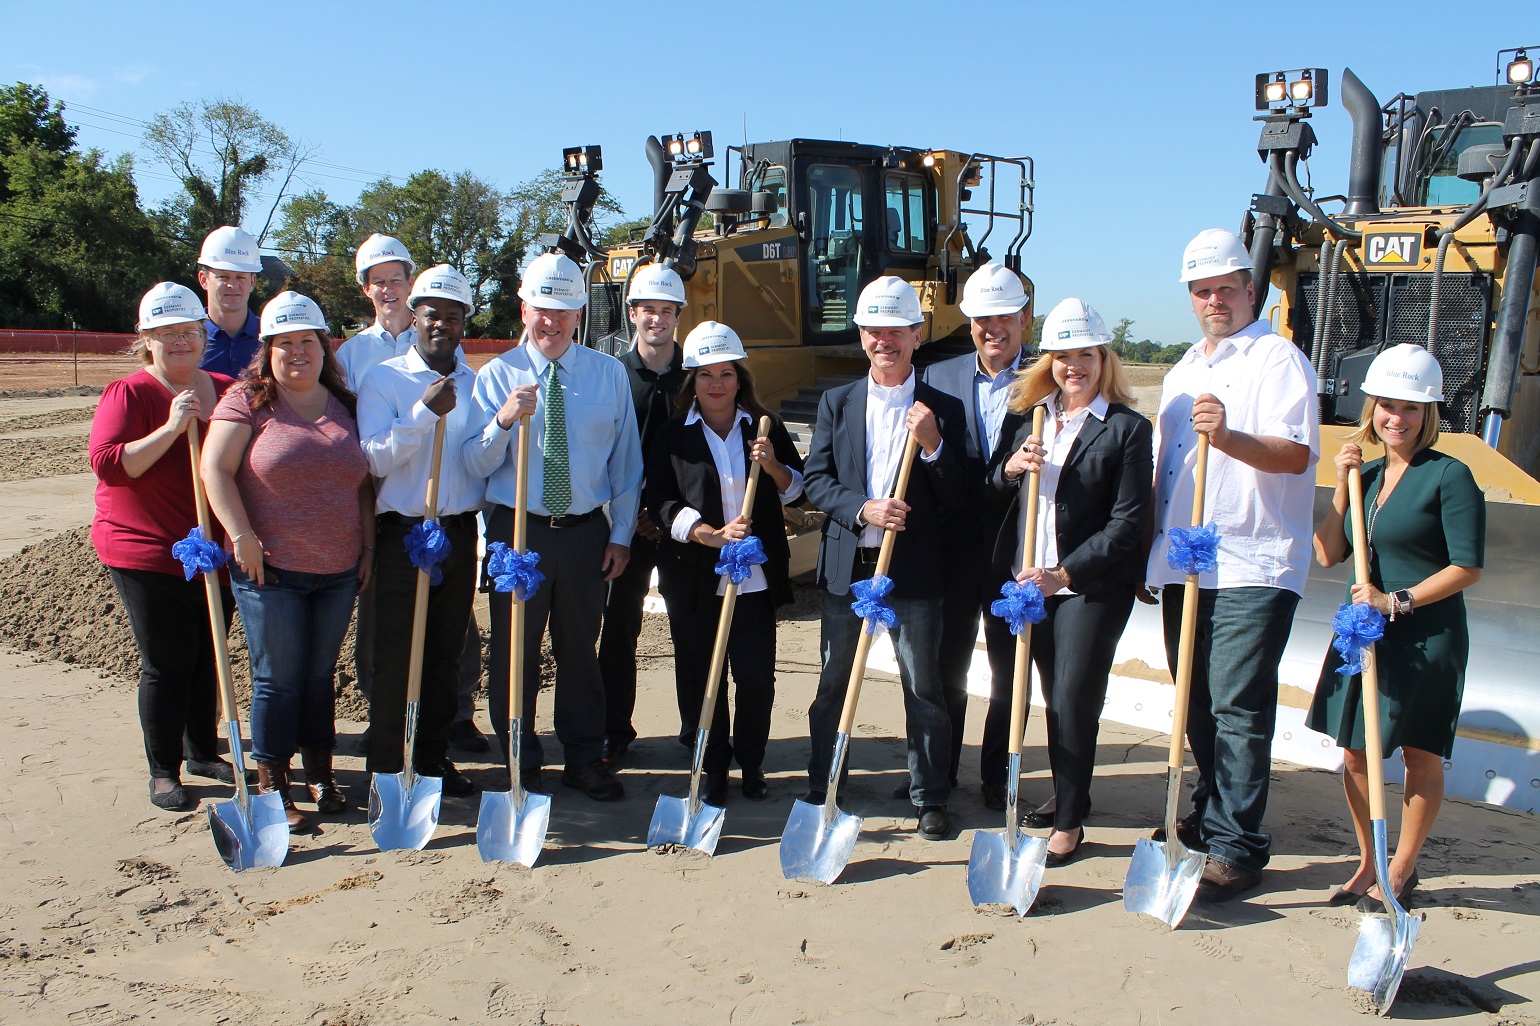 Representatives from Blue Rock, Dermody Properties and Greenyard Logistics USA celebrate the groundbreaking of a 152,200 SF packing and cold storage facility in southern New Jersey.